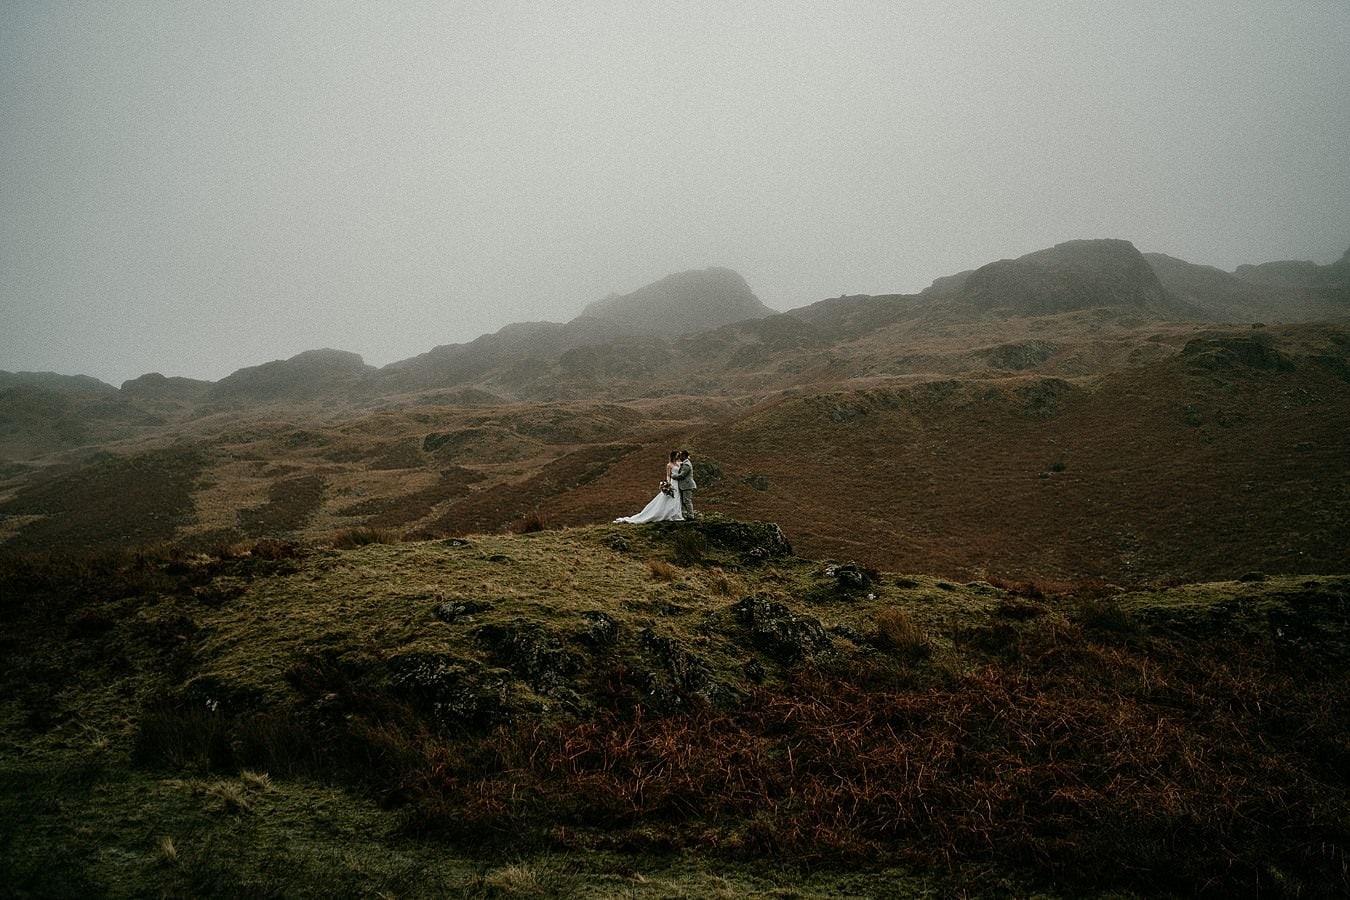 winter elopement in the lake district in Cumbria, England. Adventure elopement photographer based in Northern Ireland